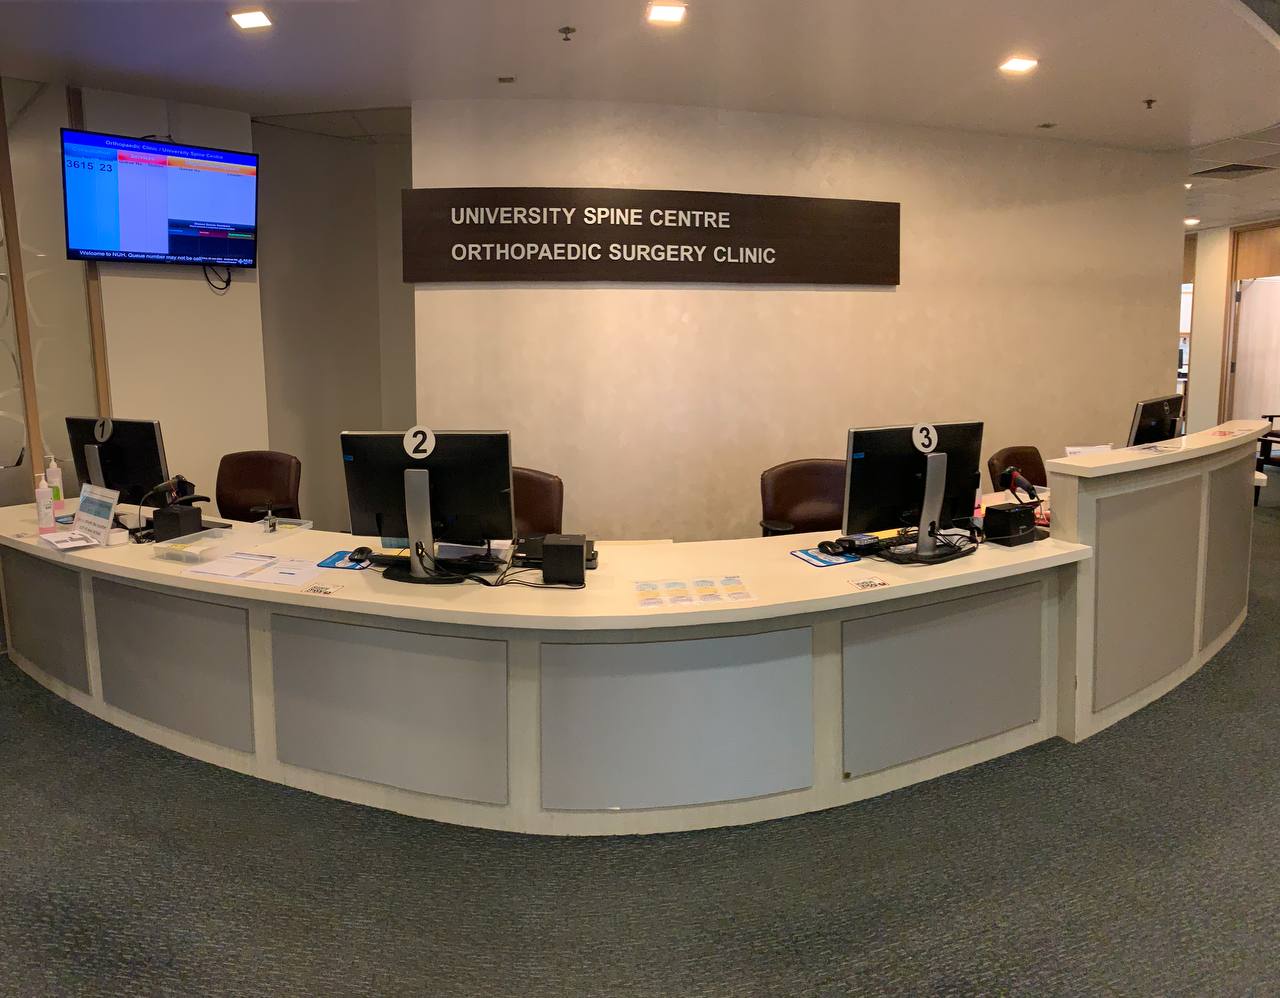 Registration and payment counter